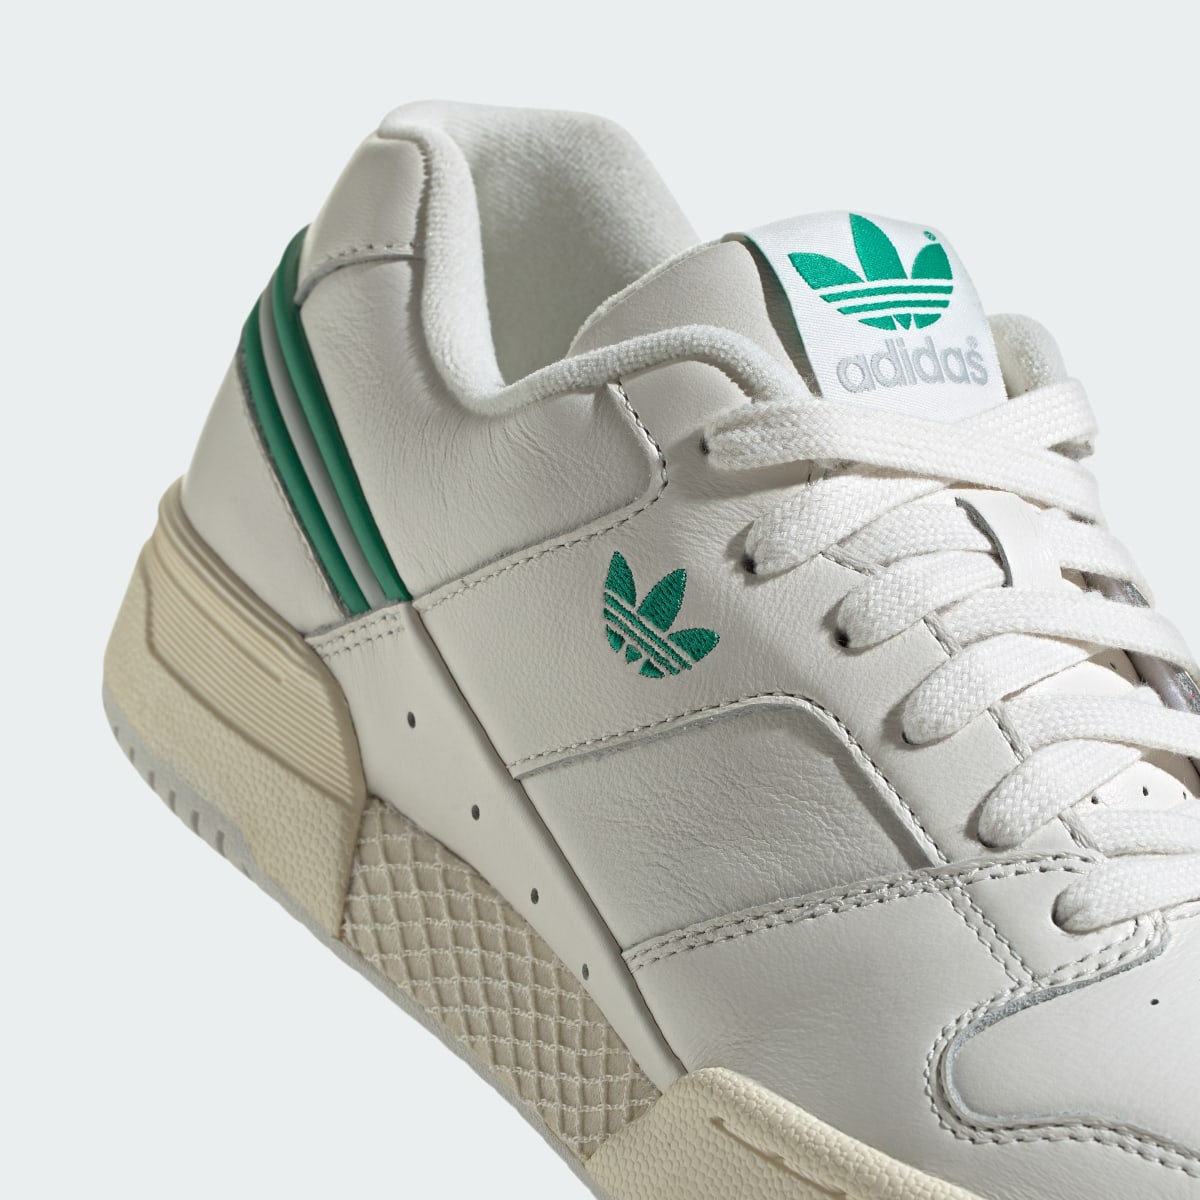 Adidas Continental 87 Shoes. 10